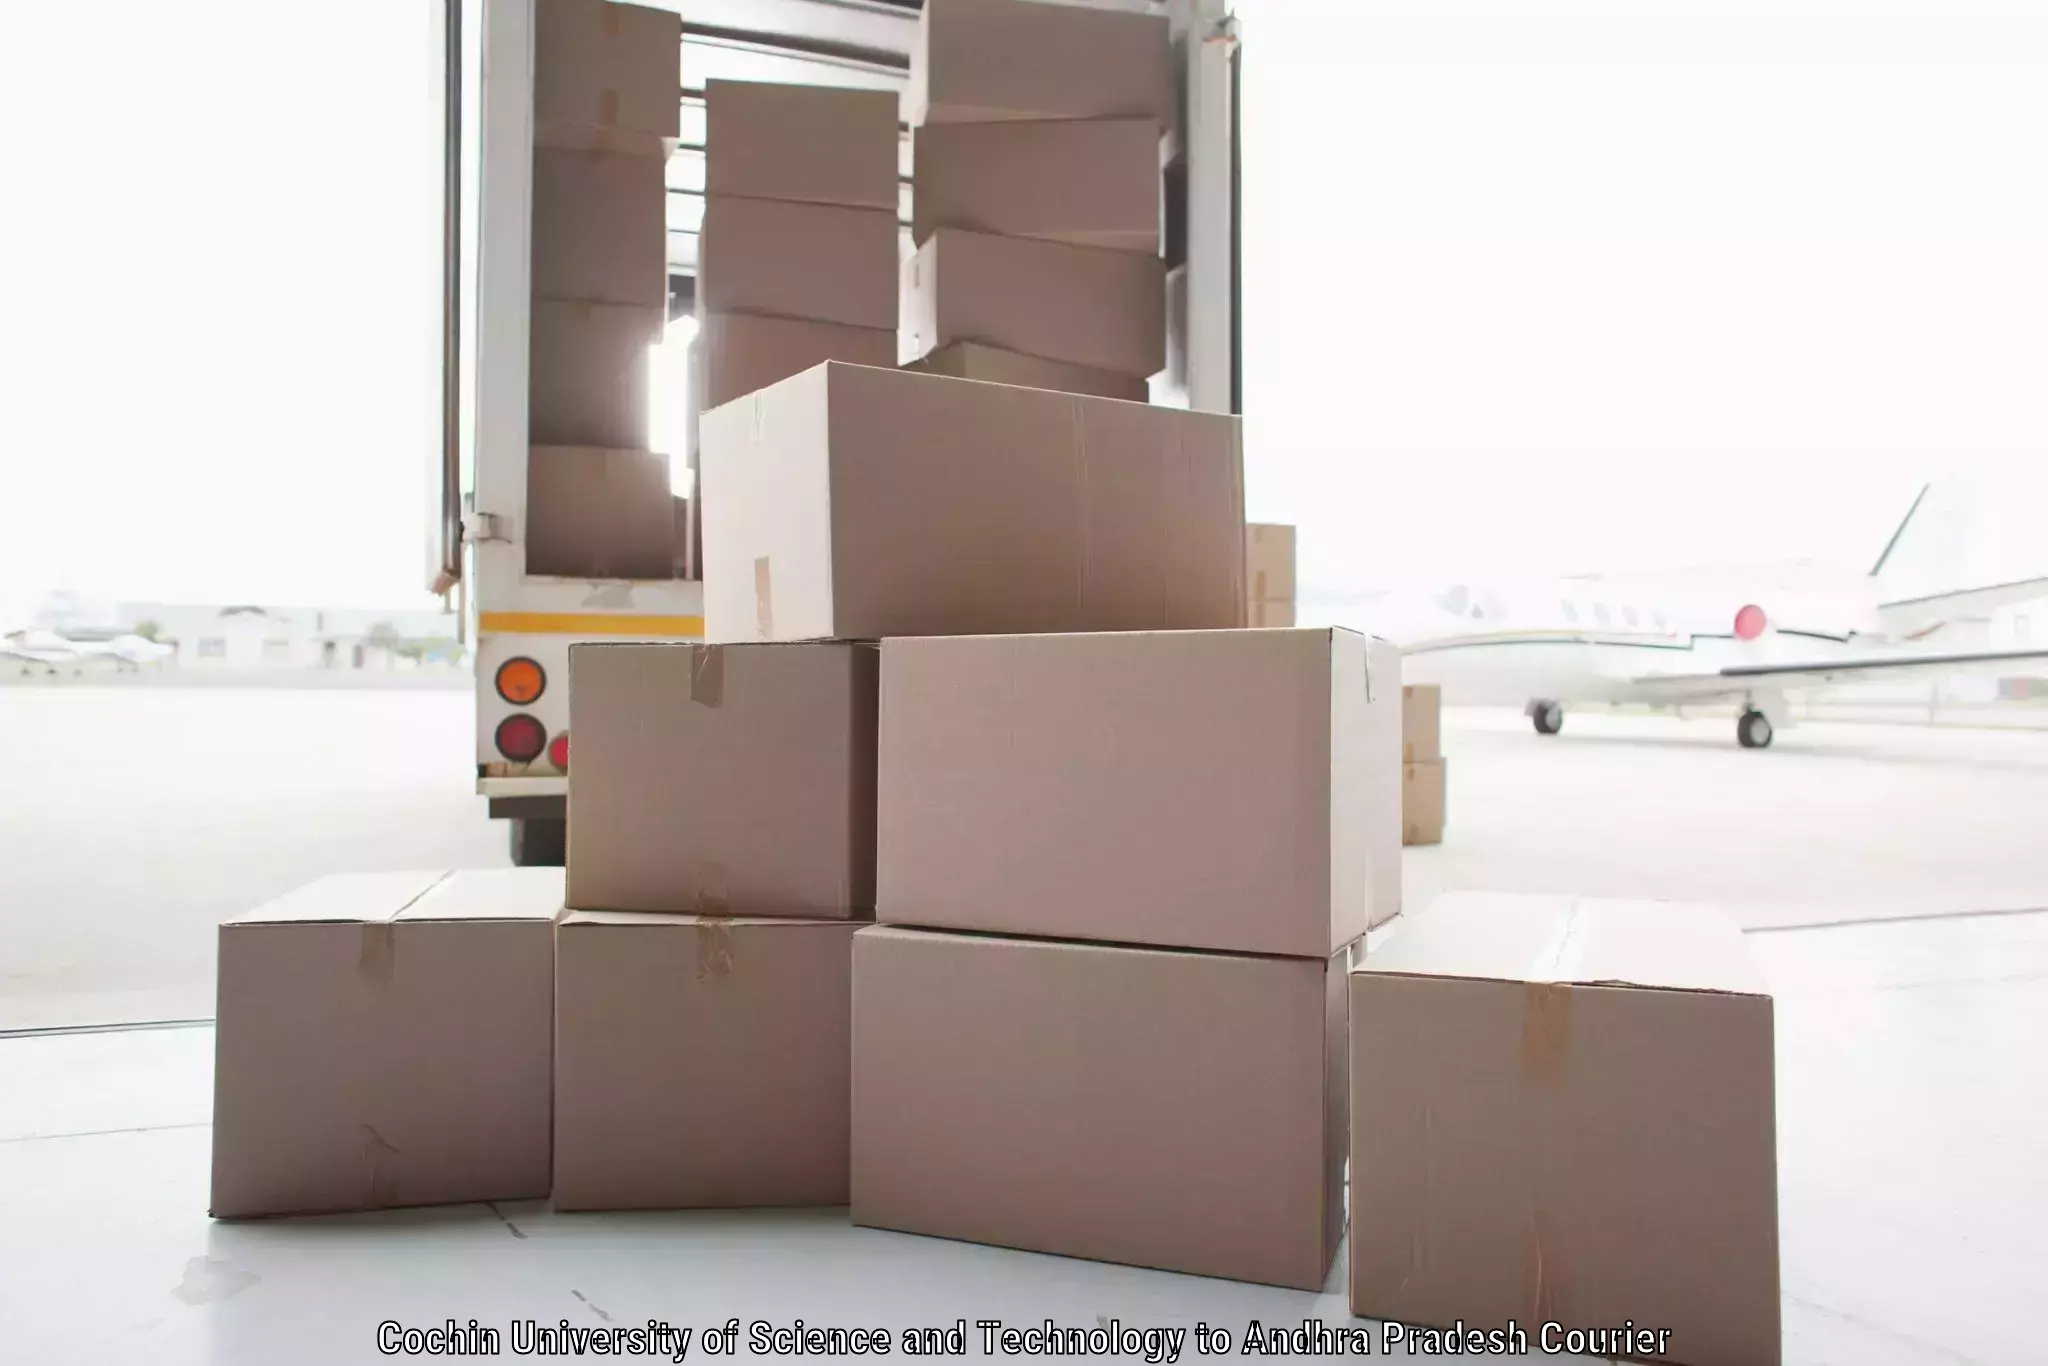 Advanced freight services Cochin University of Science and Technology to Andhra Pradesh